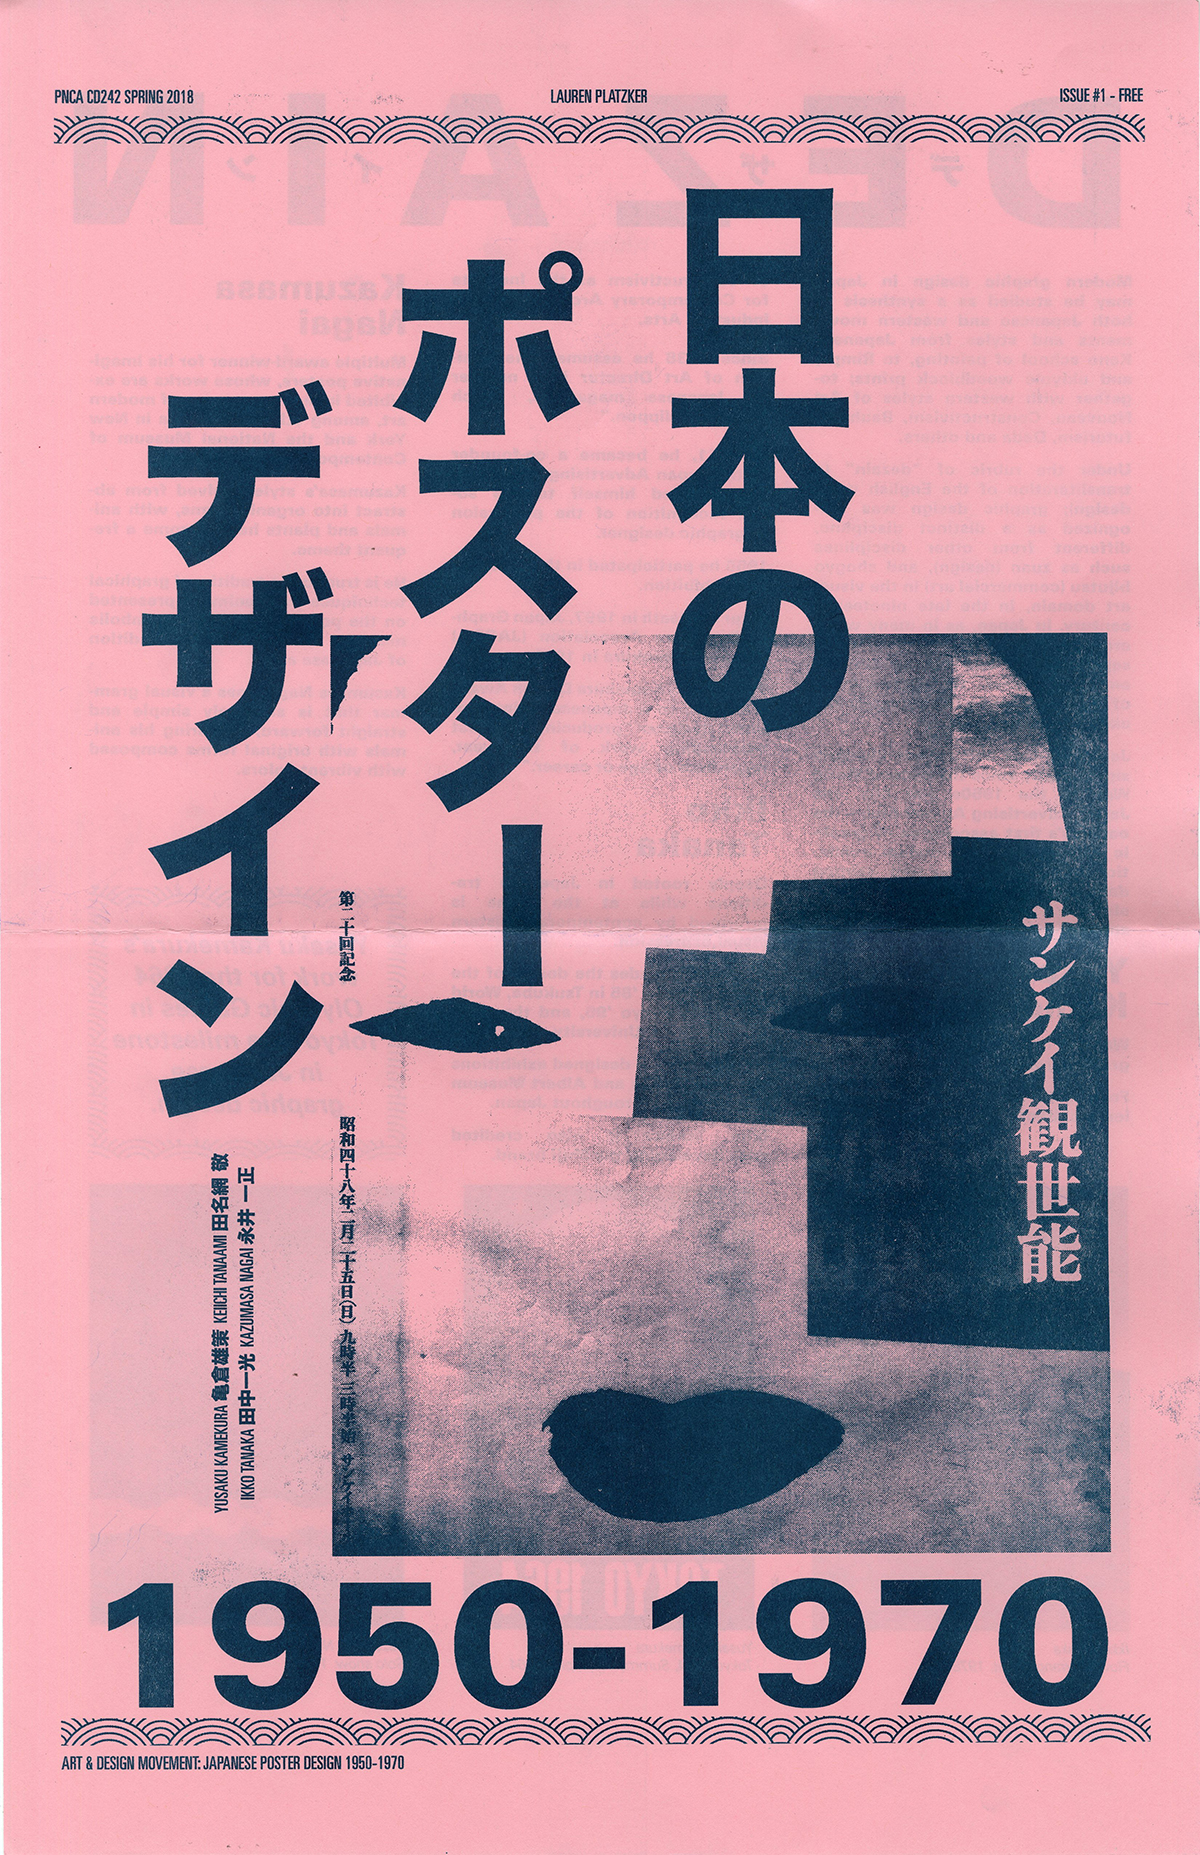 Blue monochromatic newsprint poster on pink newsprint with japanese lettering and graphic symbols of a woman’s face. Text below reads '1950-1970'